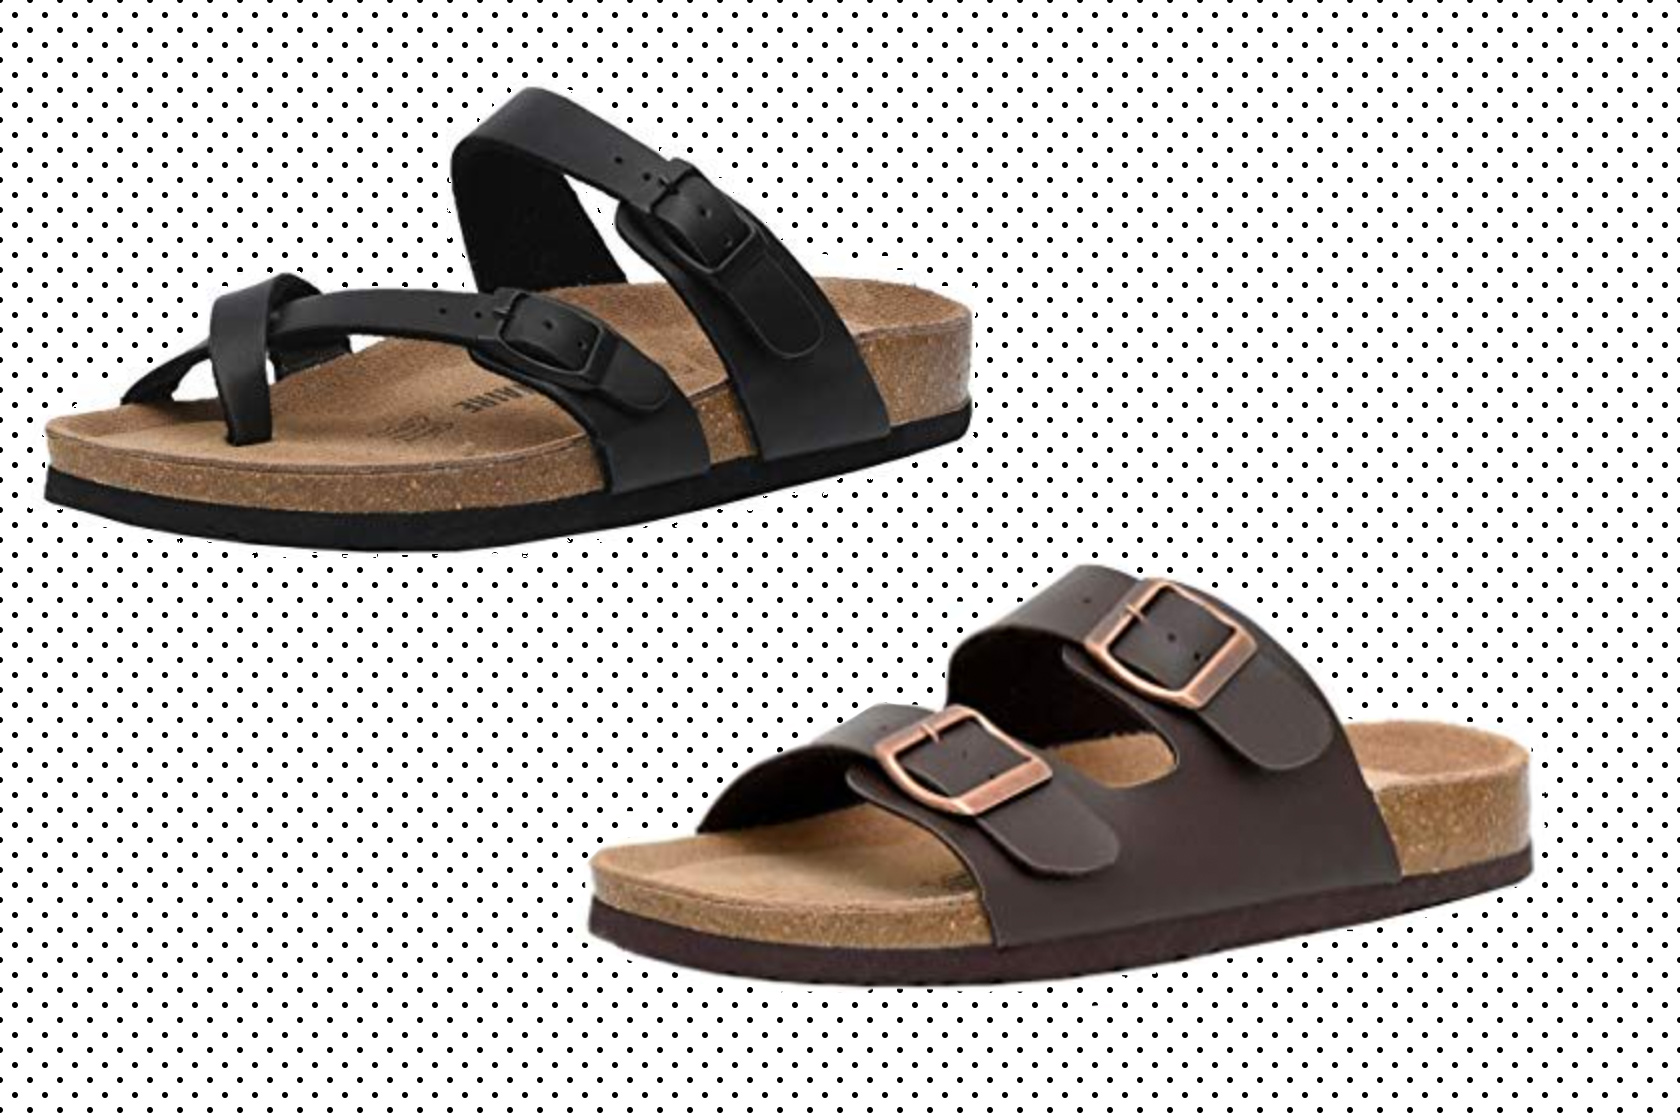 21 customer-loved Amazon sandals to shop under $30